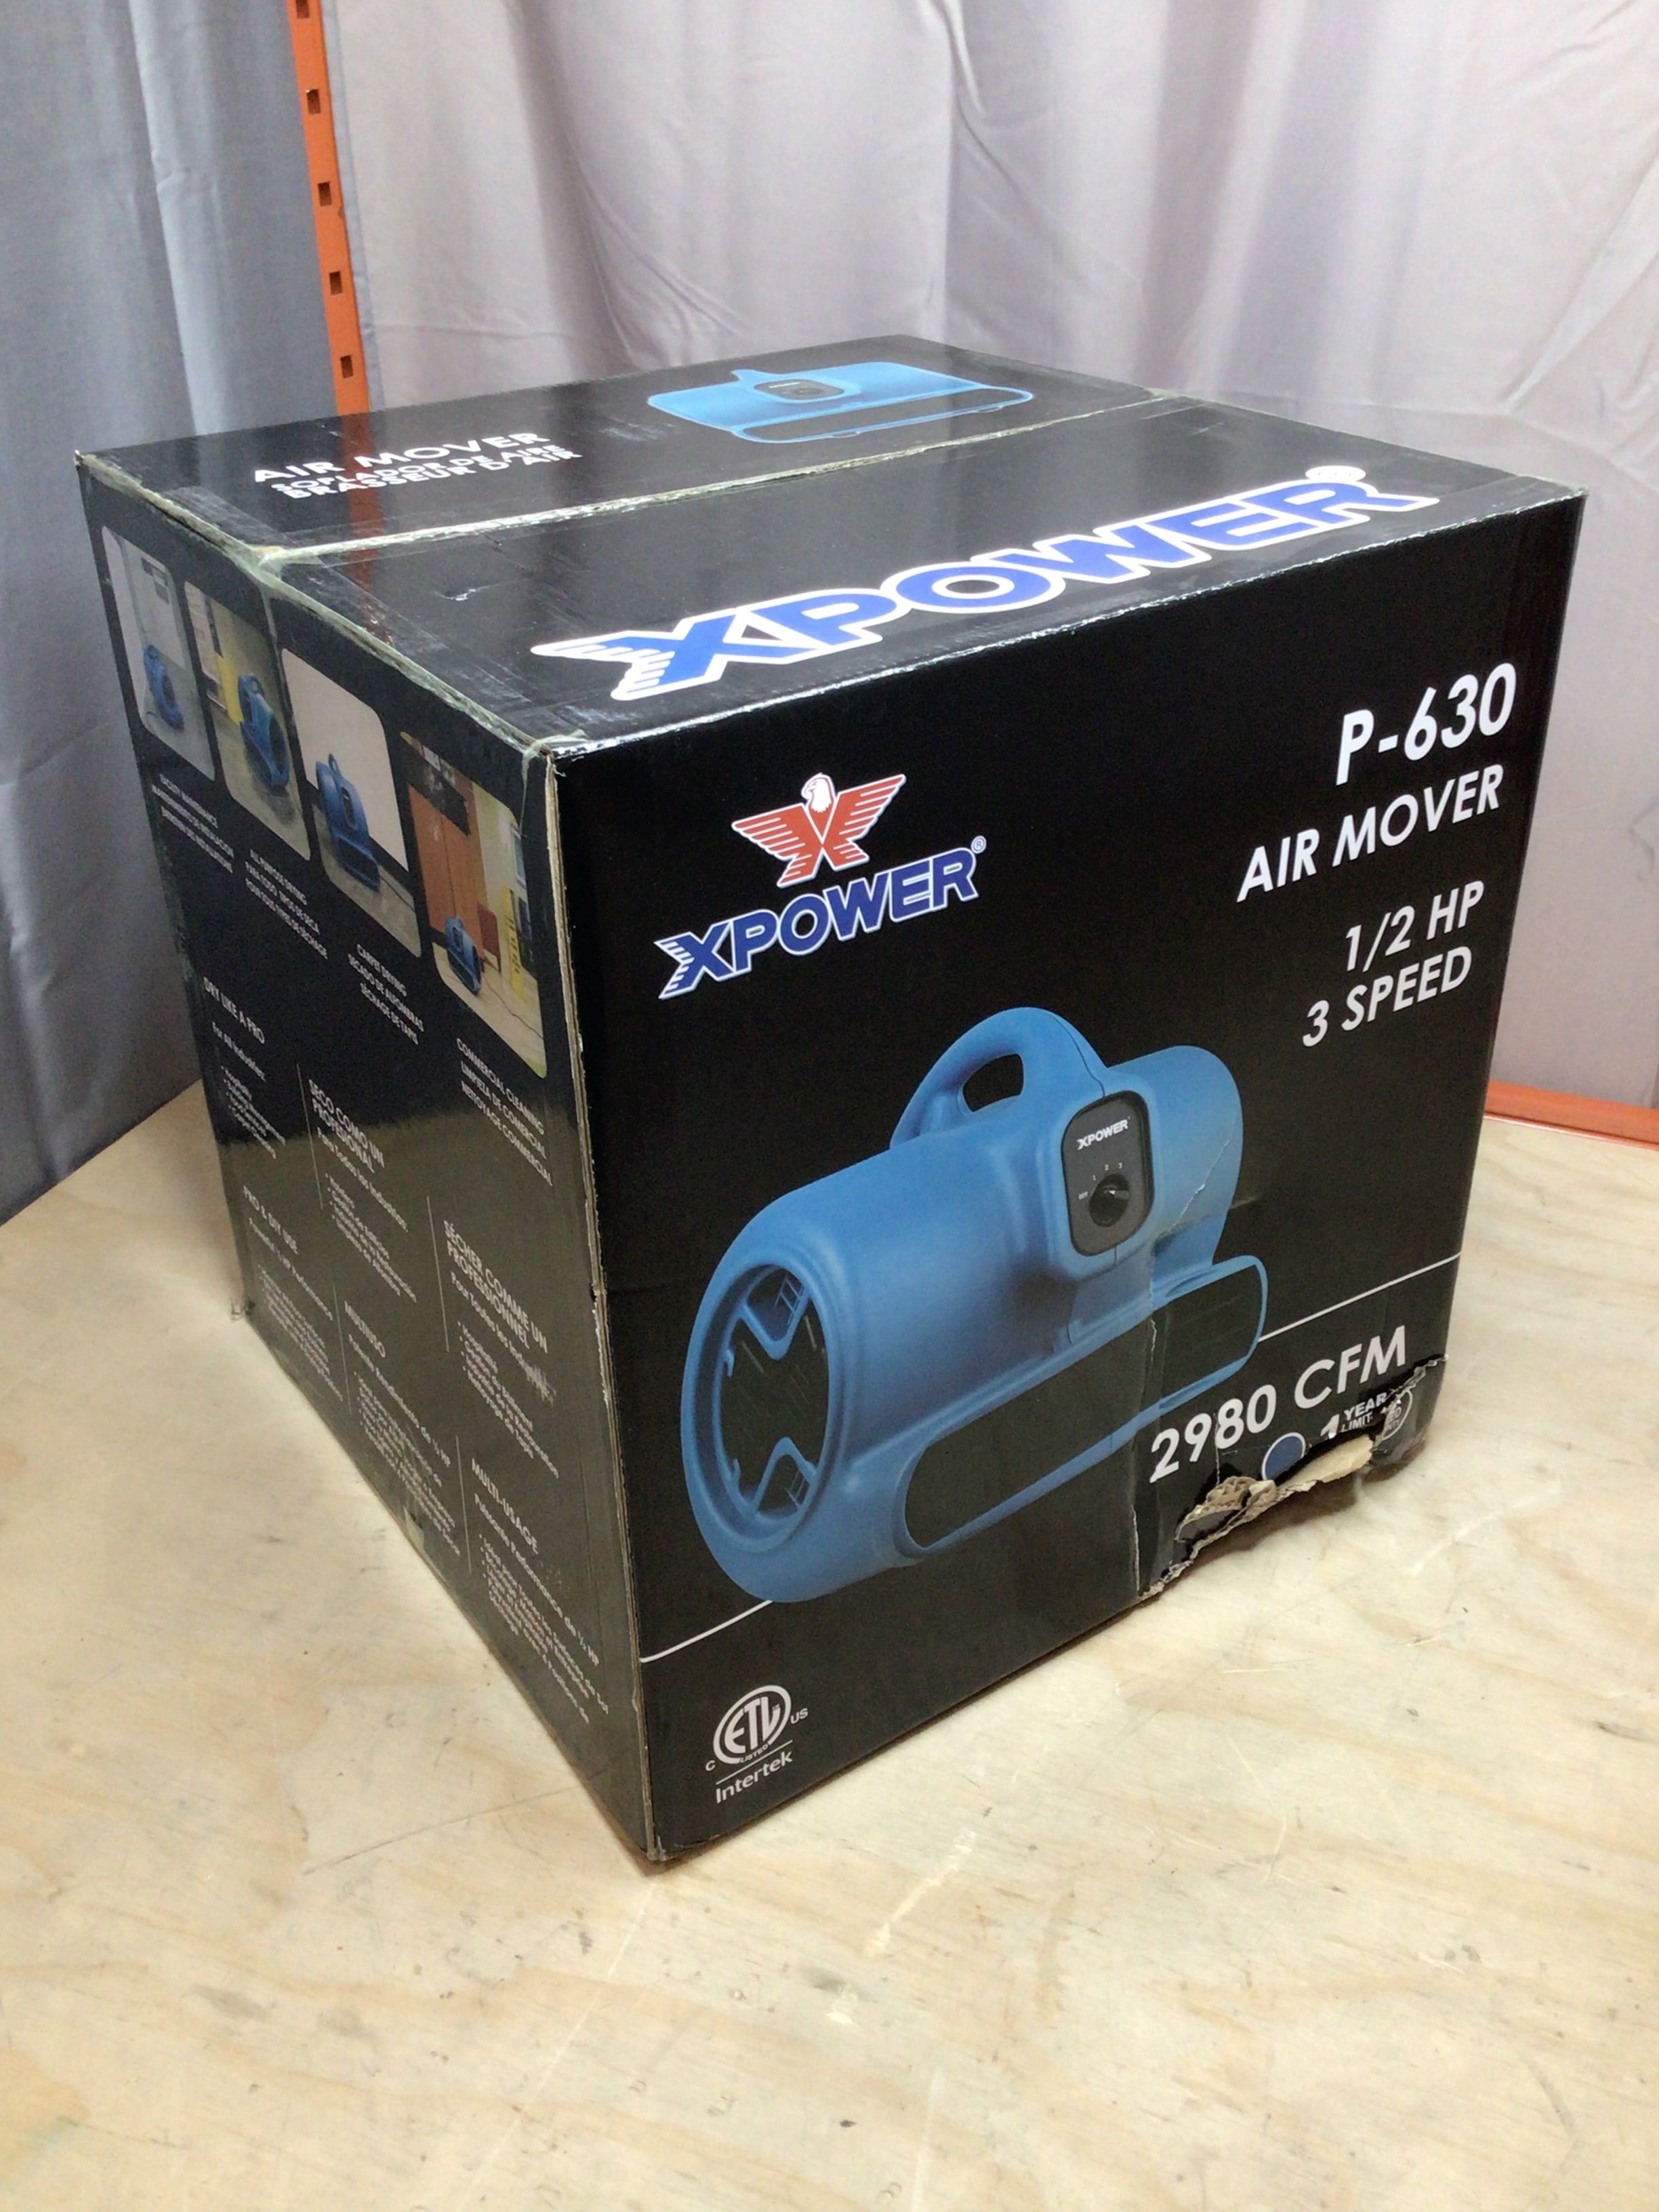 XPOWER P-630 1/2 HP, 2800 CFM Air Mover **Box Damage, Sealed** (8174540685550)